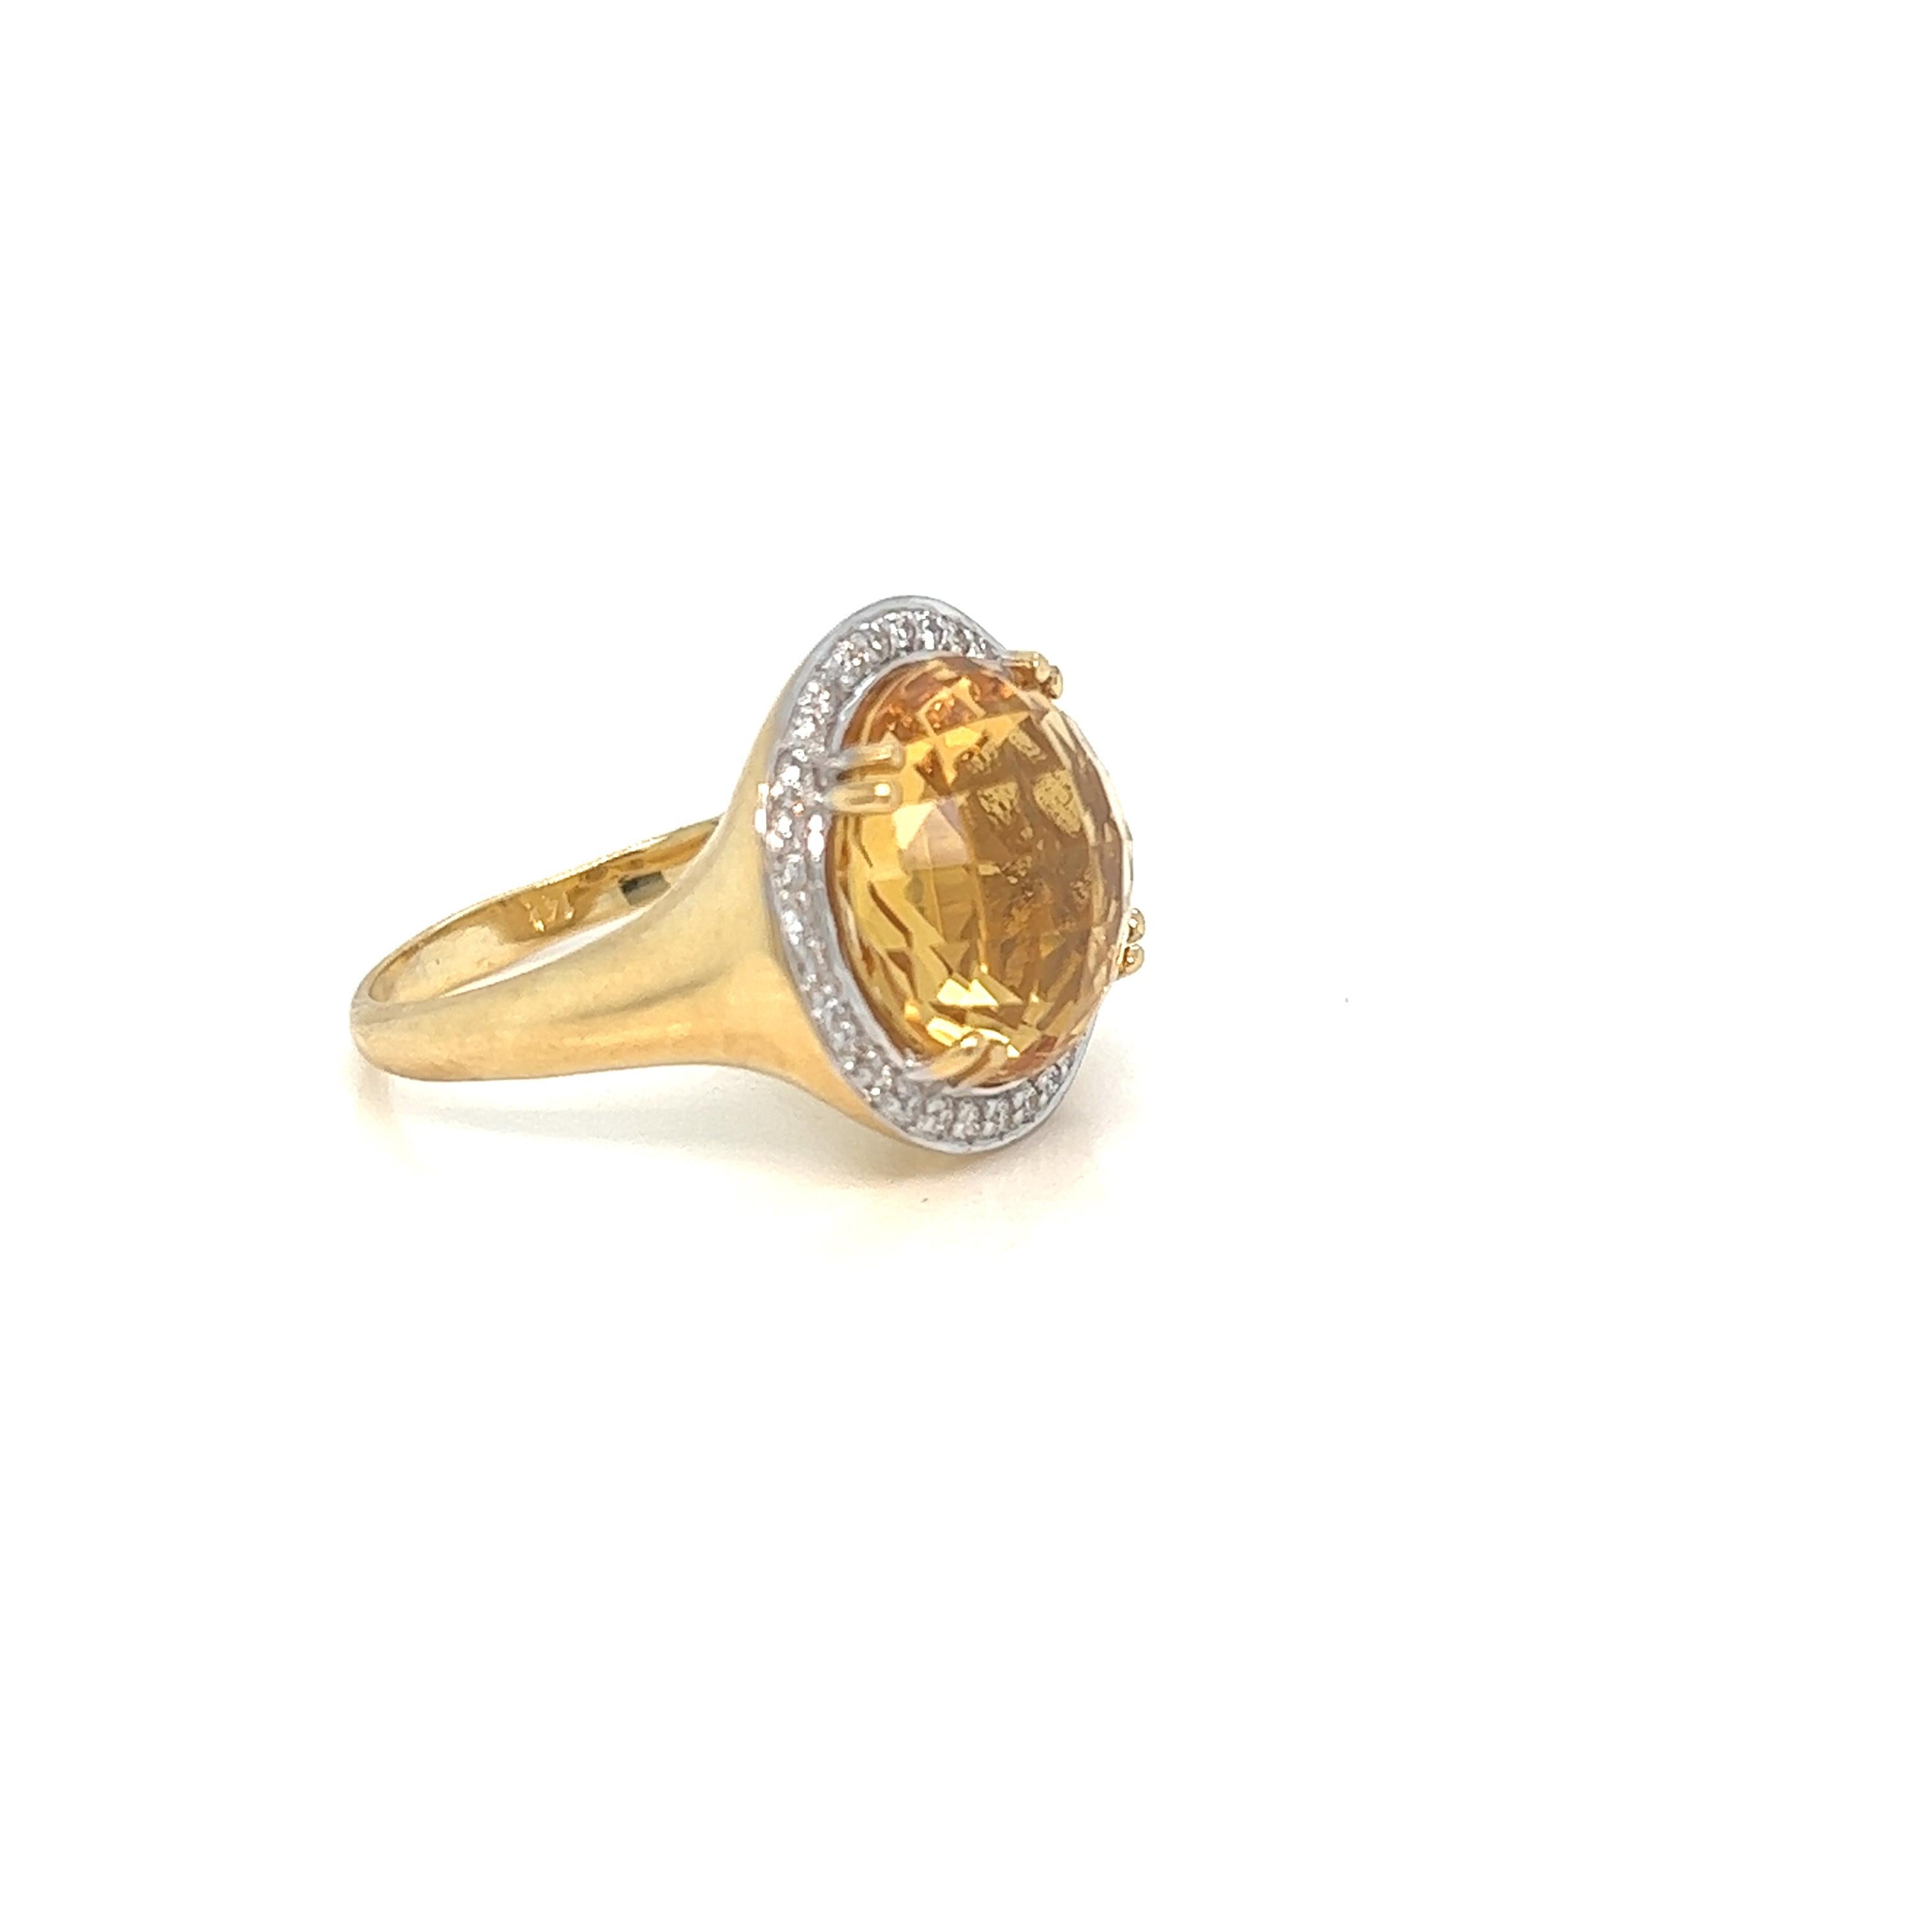 For Sale:  Hand-Crafted 14K Yellow Gold Citrine Color Stone Cocktail Ring 3